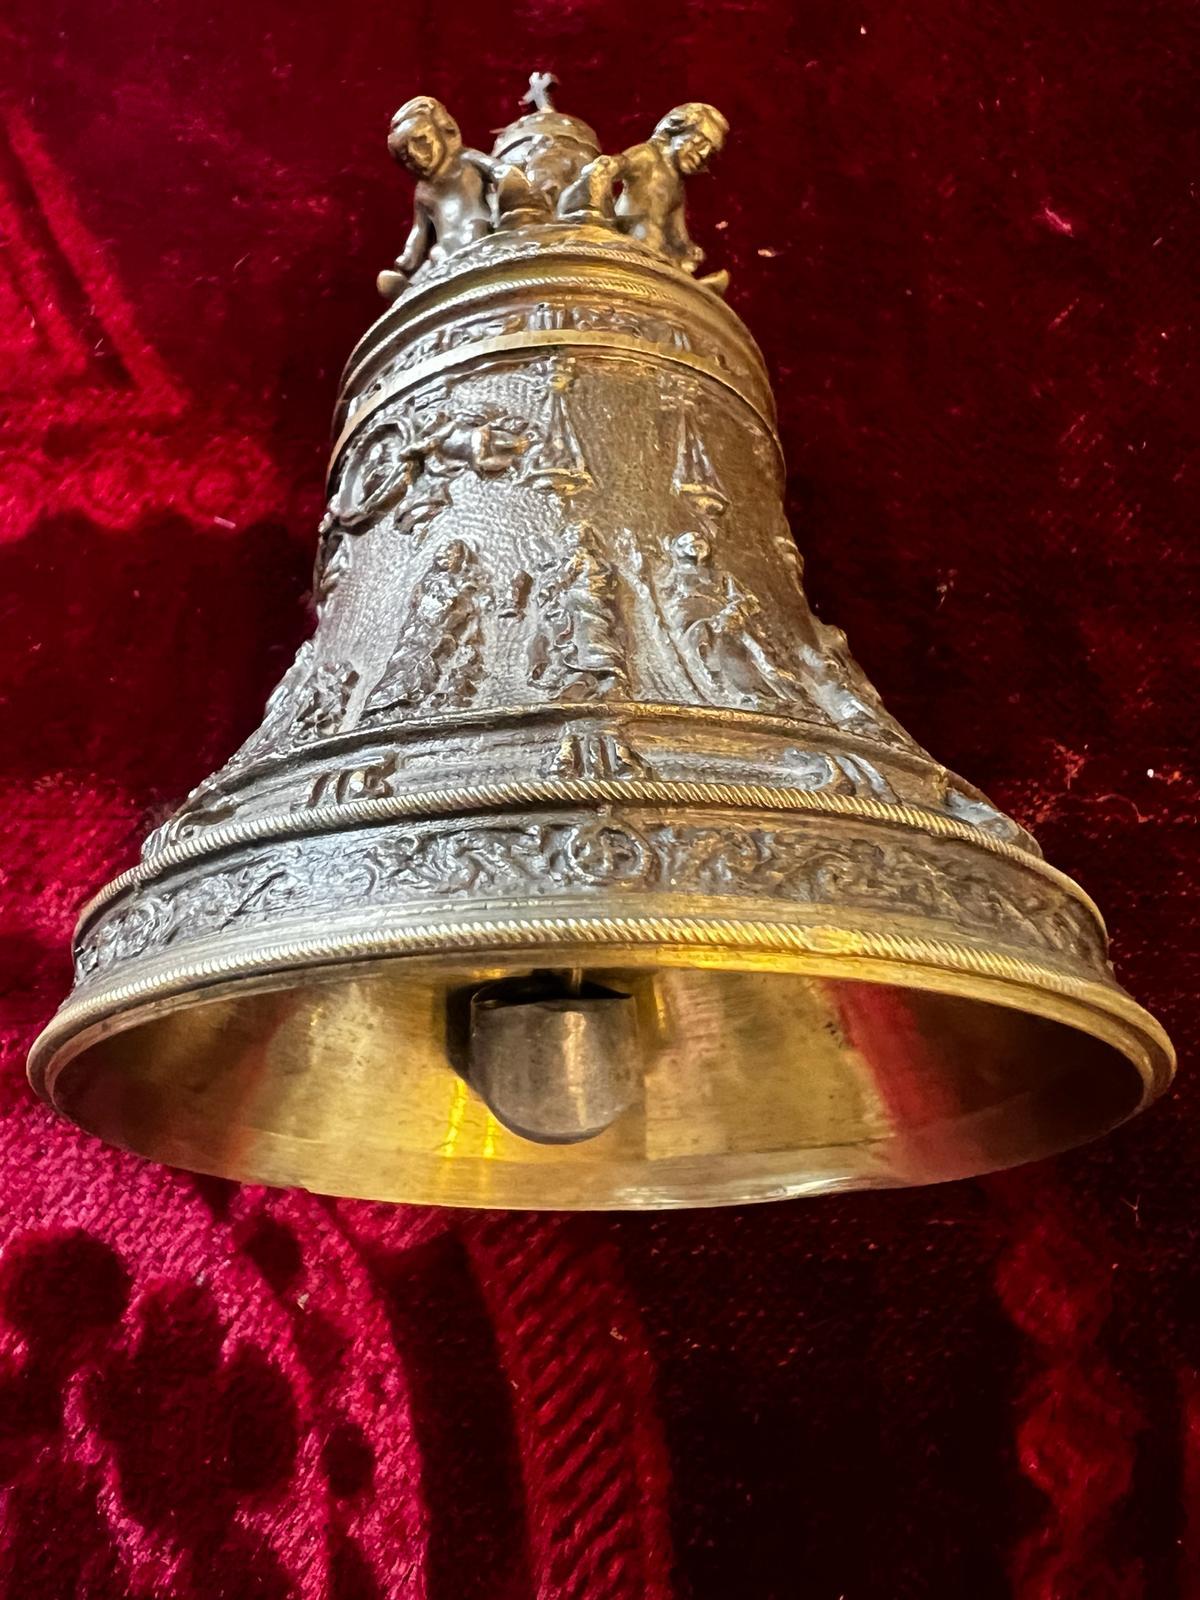 This is an exquisite bronze monastery table bell with extremely detailed ornaments of the twelve followers of Jesus. On the top there are four angels (putti).  The top shows the Cross of Jesus Christ. The Bell has an absolut beautiful sound. 